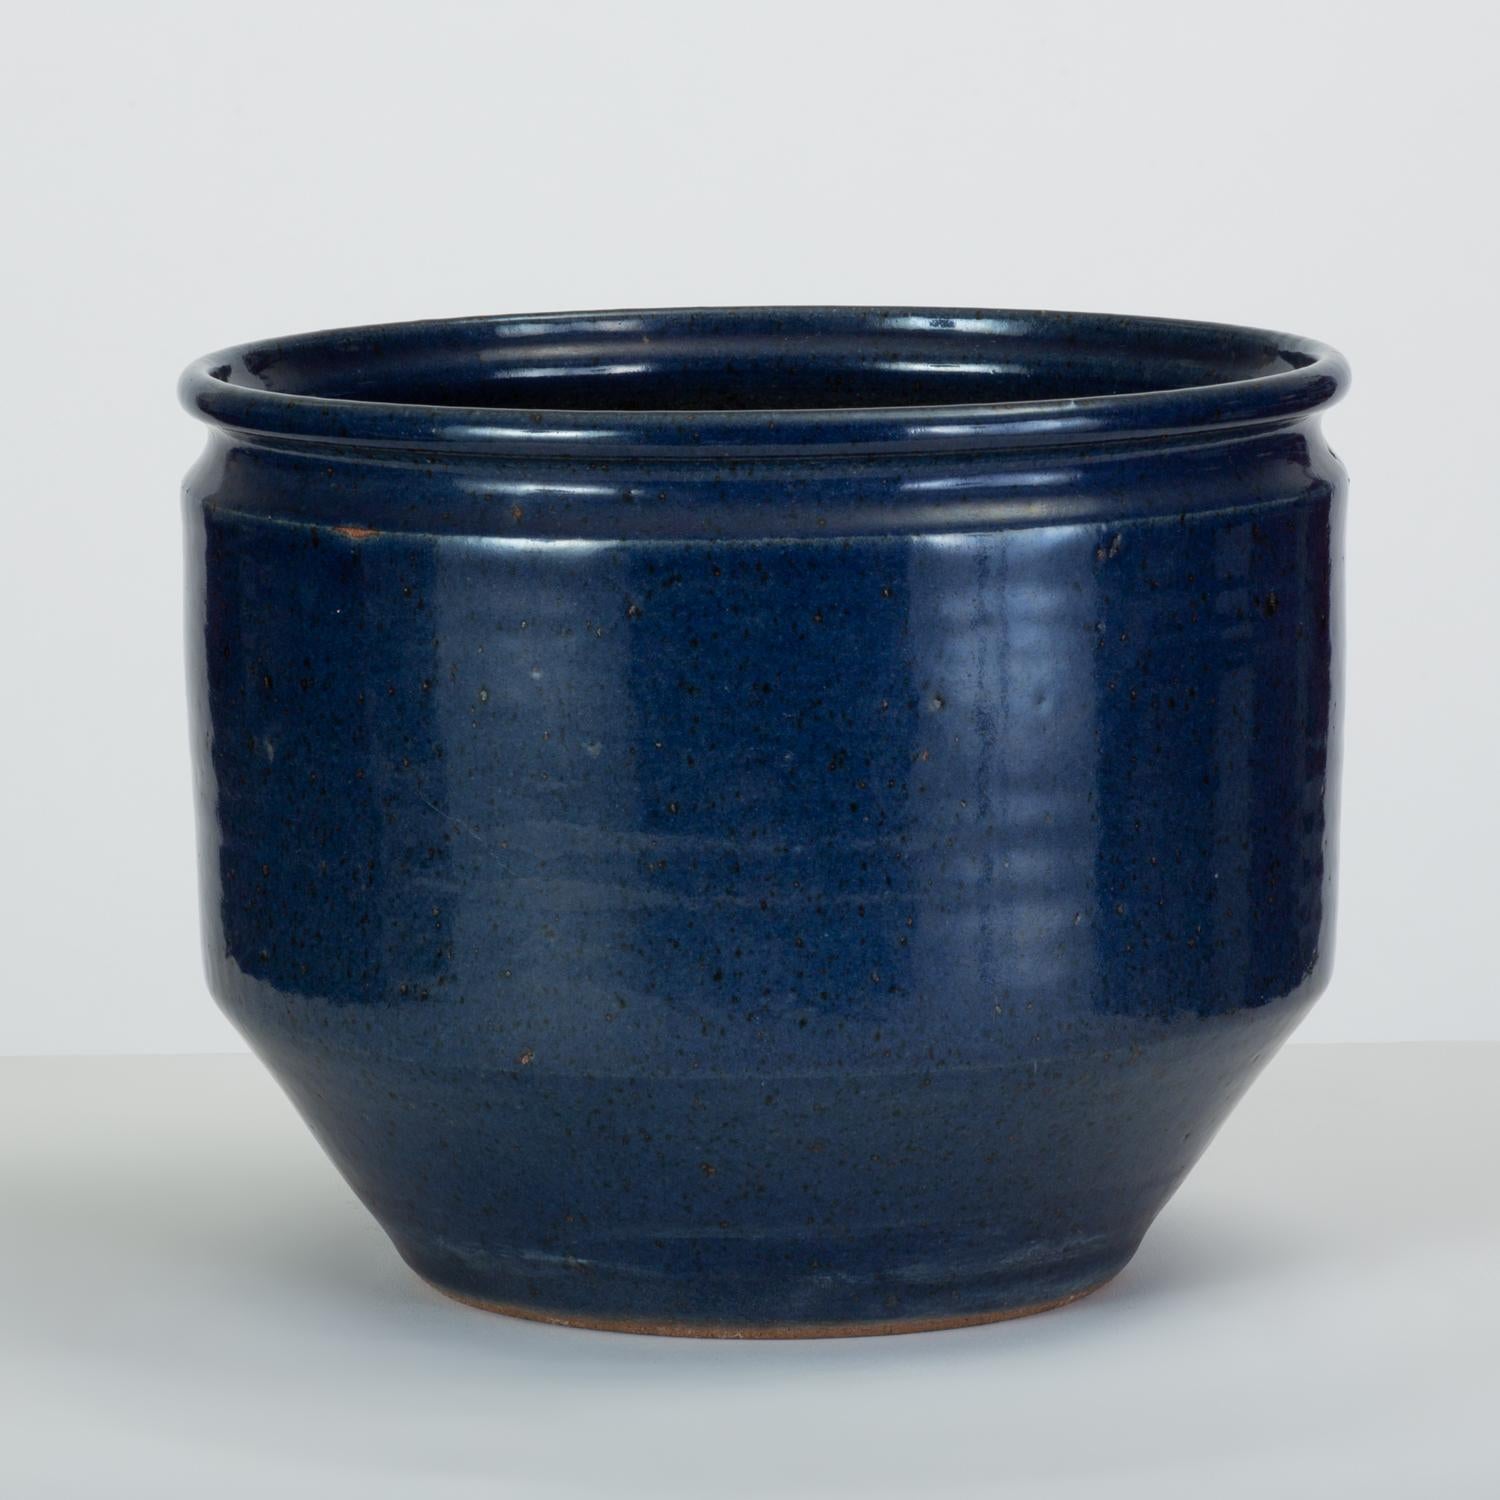 Pair of Blue-Glazed Earthgender Bowl Planters, David Cressey and Robert Maxwell 6